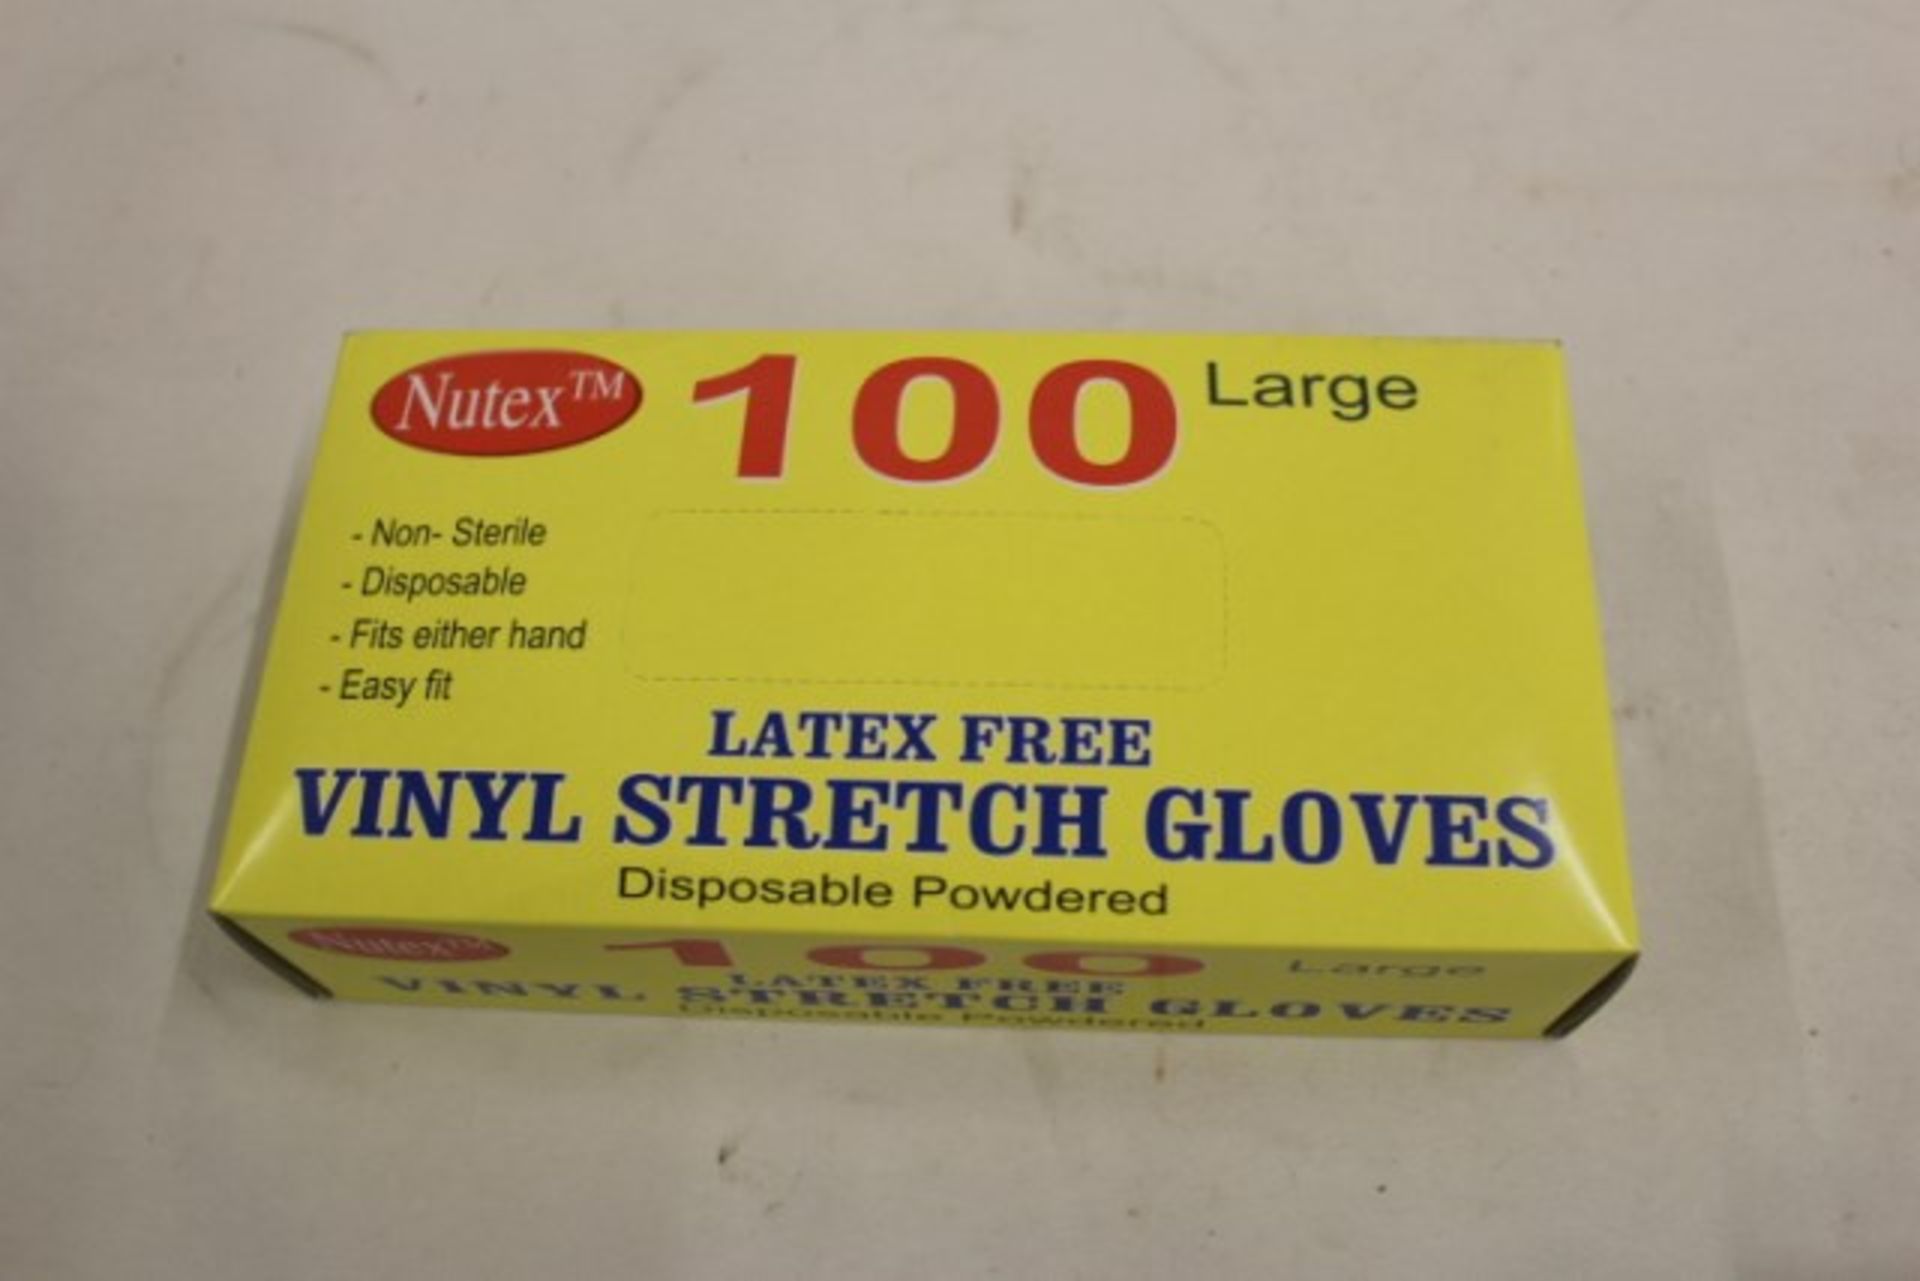 V *TRADE QTY* Brand New 100 Pairs Latex Free Vinyl Stretch Gloves X 3 YOUR BID PRICE TO BE